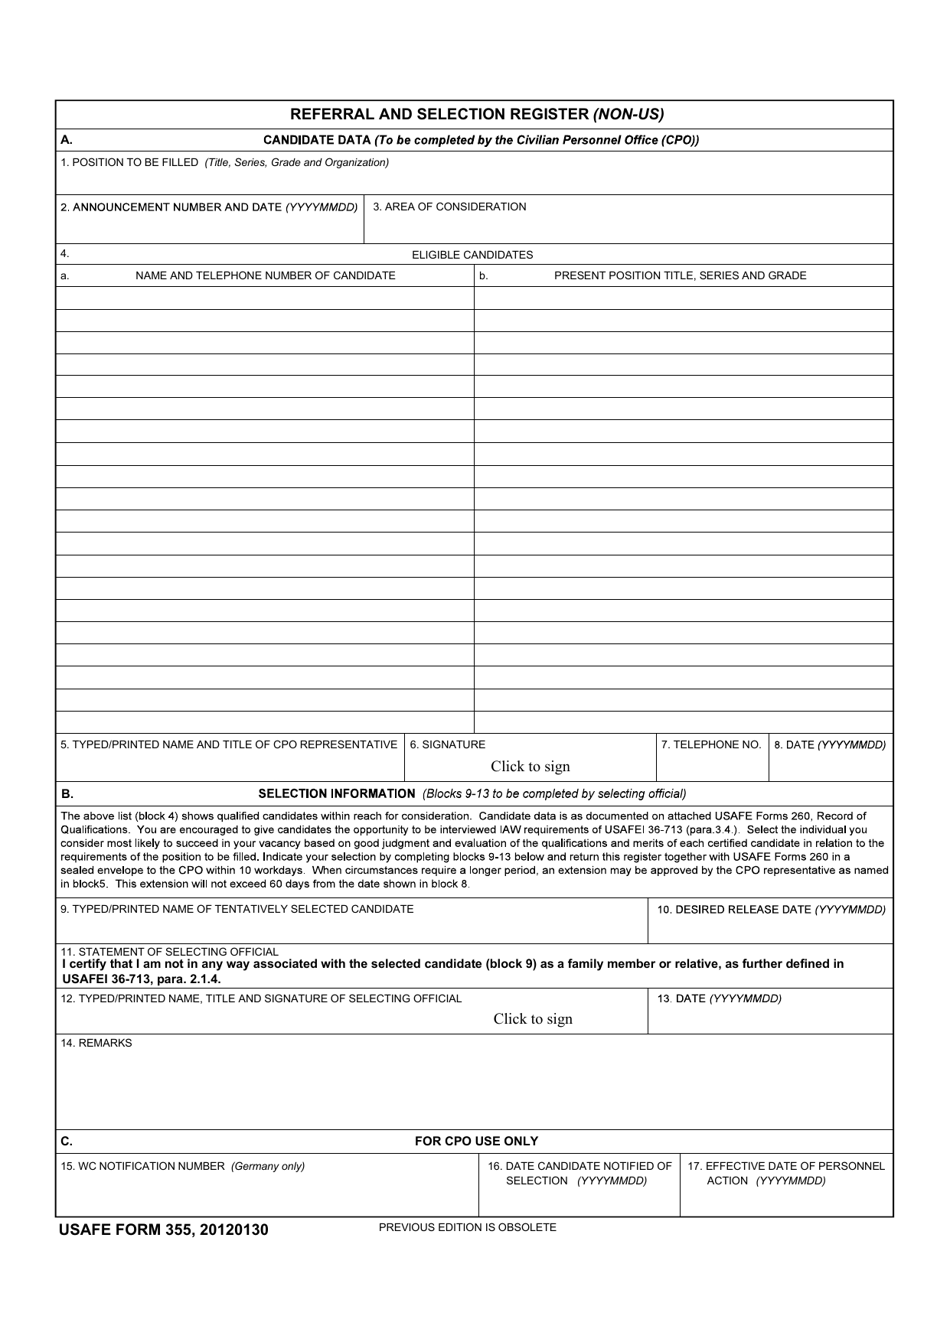 USAFE Form 355 Referral and Selection Register (Non-US), Page 1